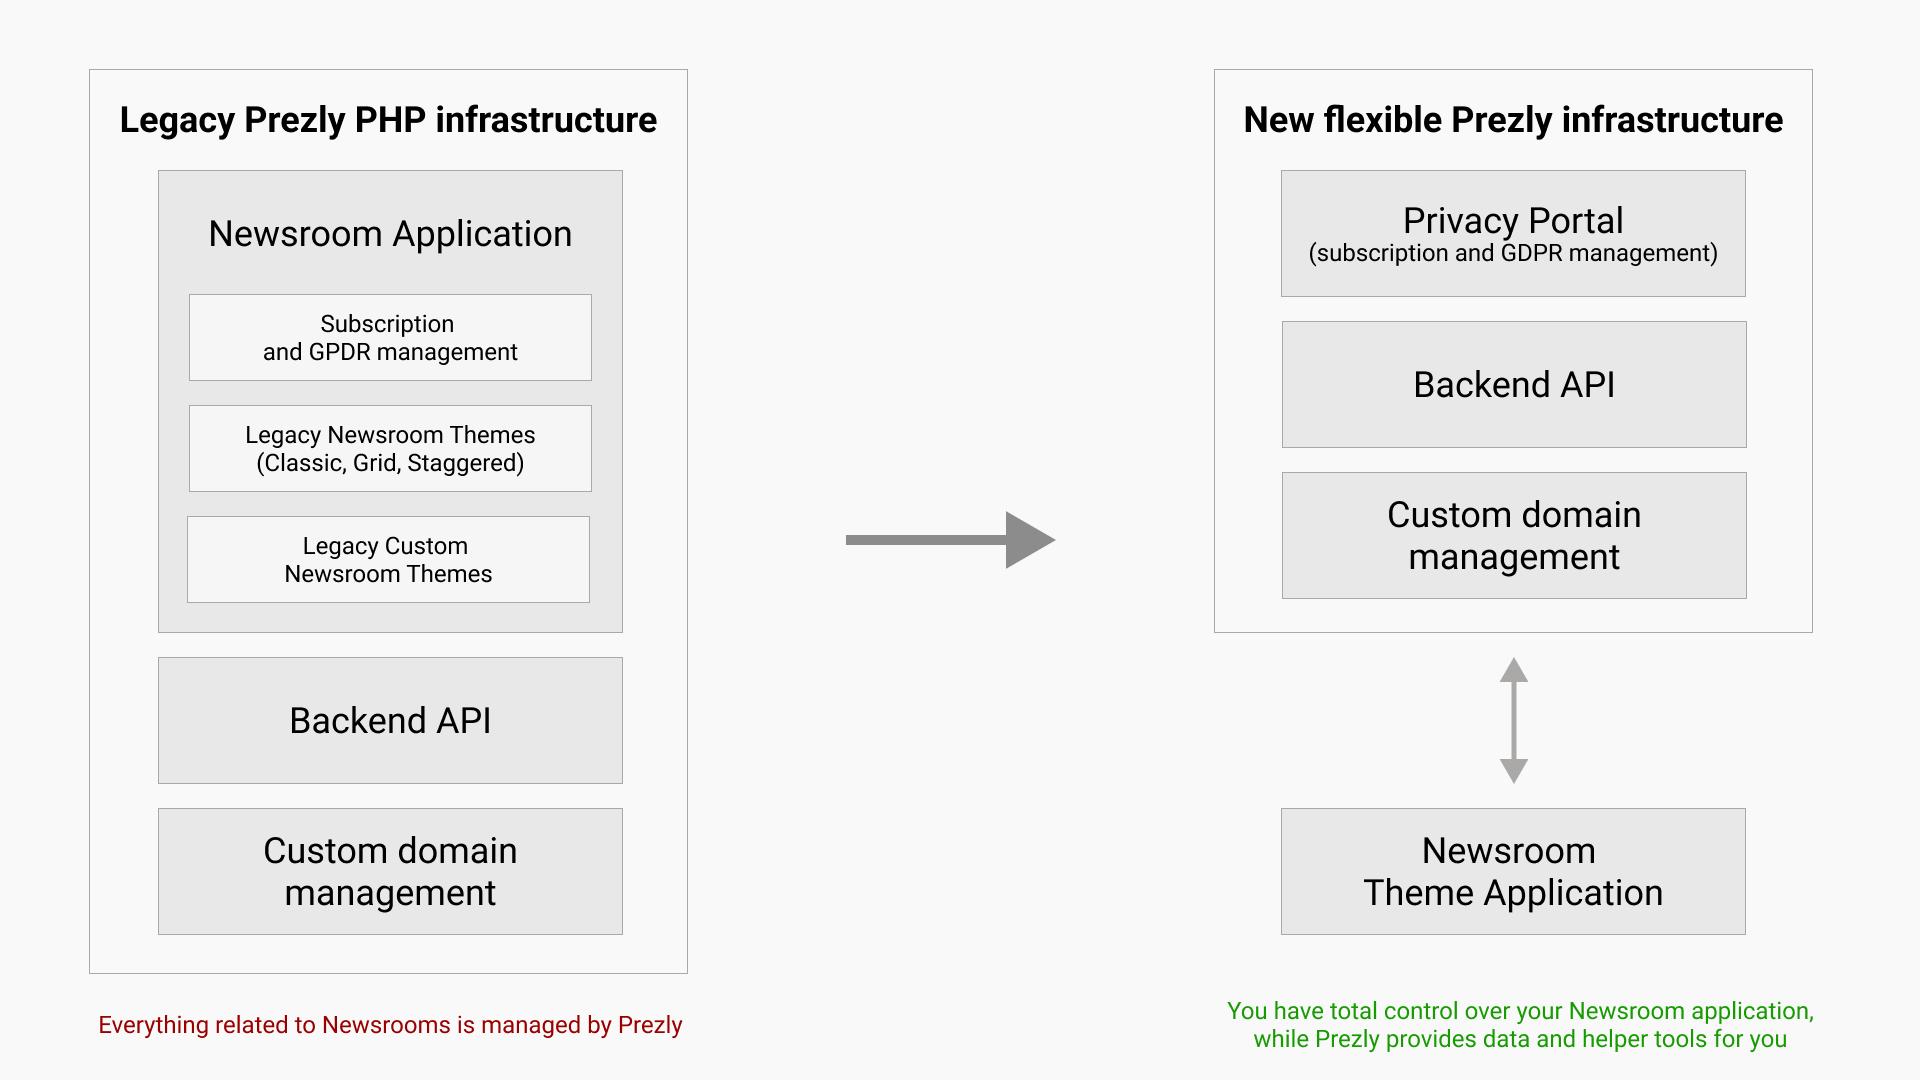 A comparison between the old rigid infrastructure and the new flexible infrastructure with independent newsroom applications